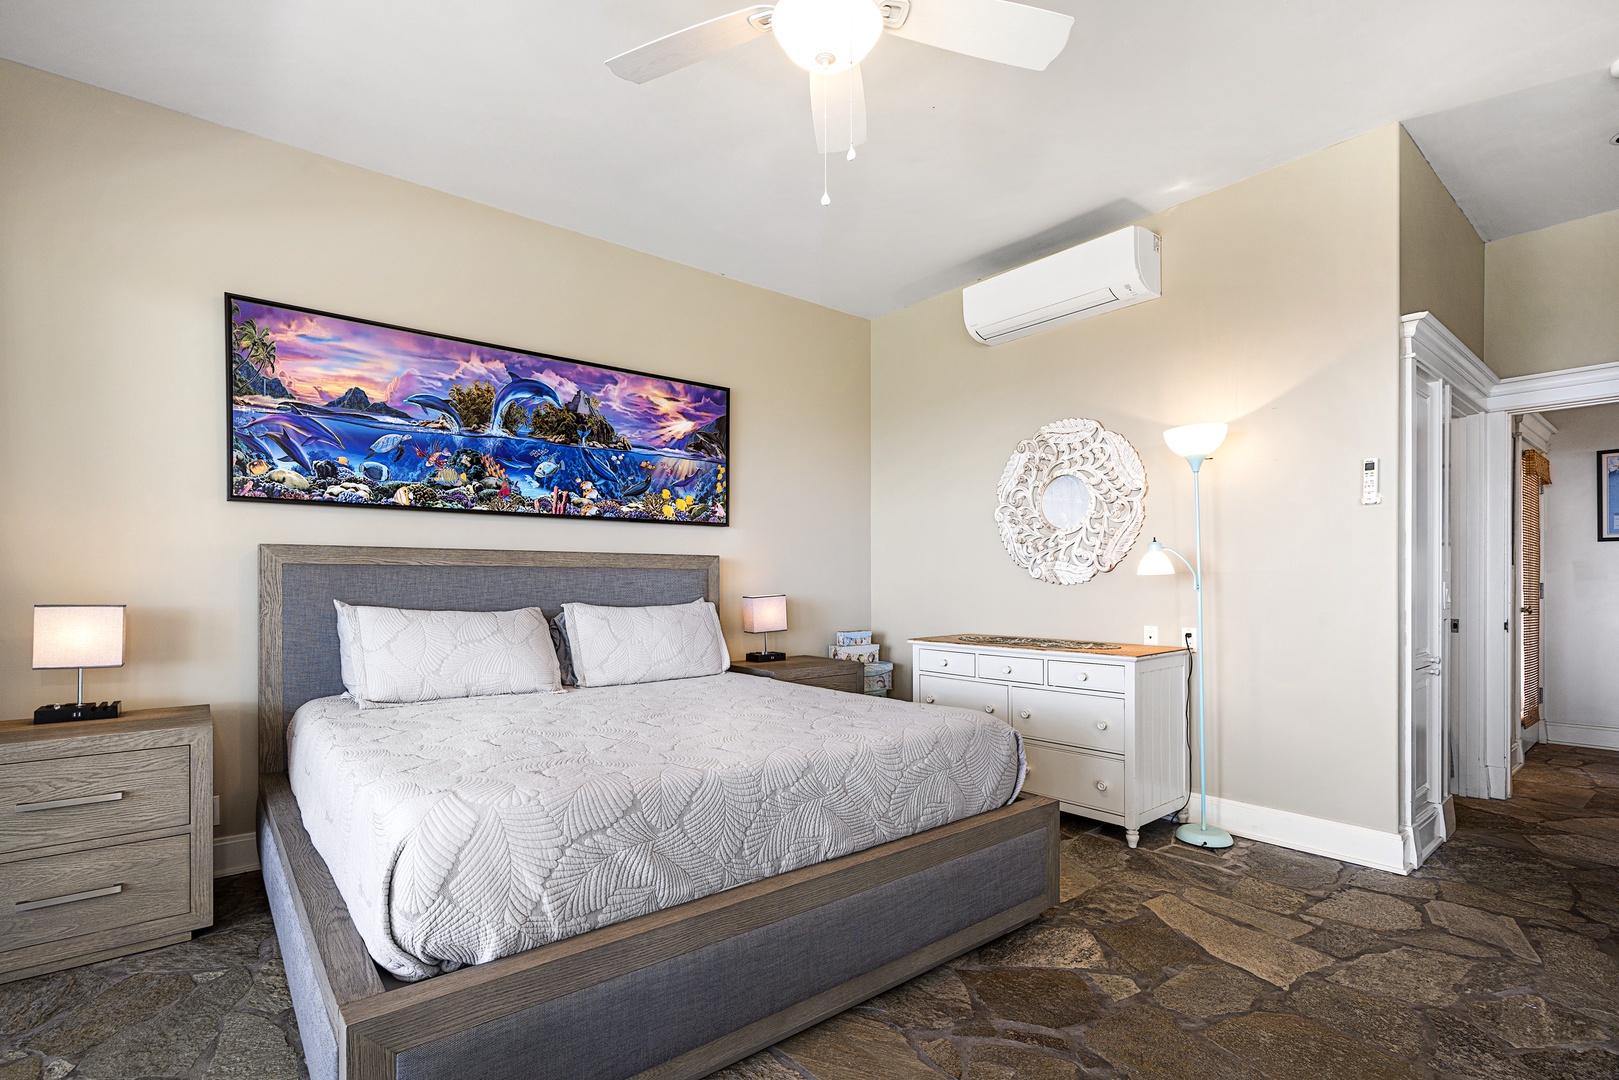 Kailua Kona Vacation Rentals, Kona Blue - For those that may have mobility issues this space is perfect, steps from the front door with a smooth entry shower